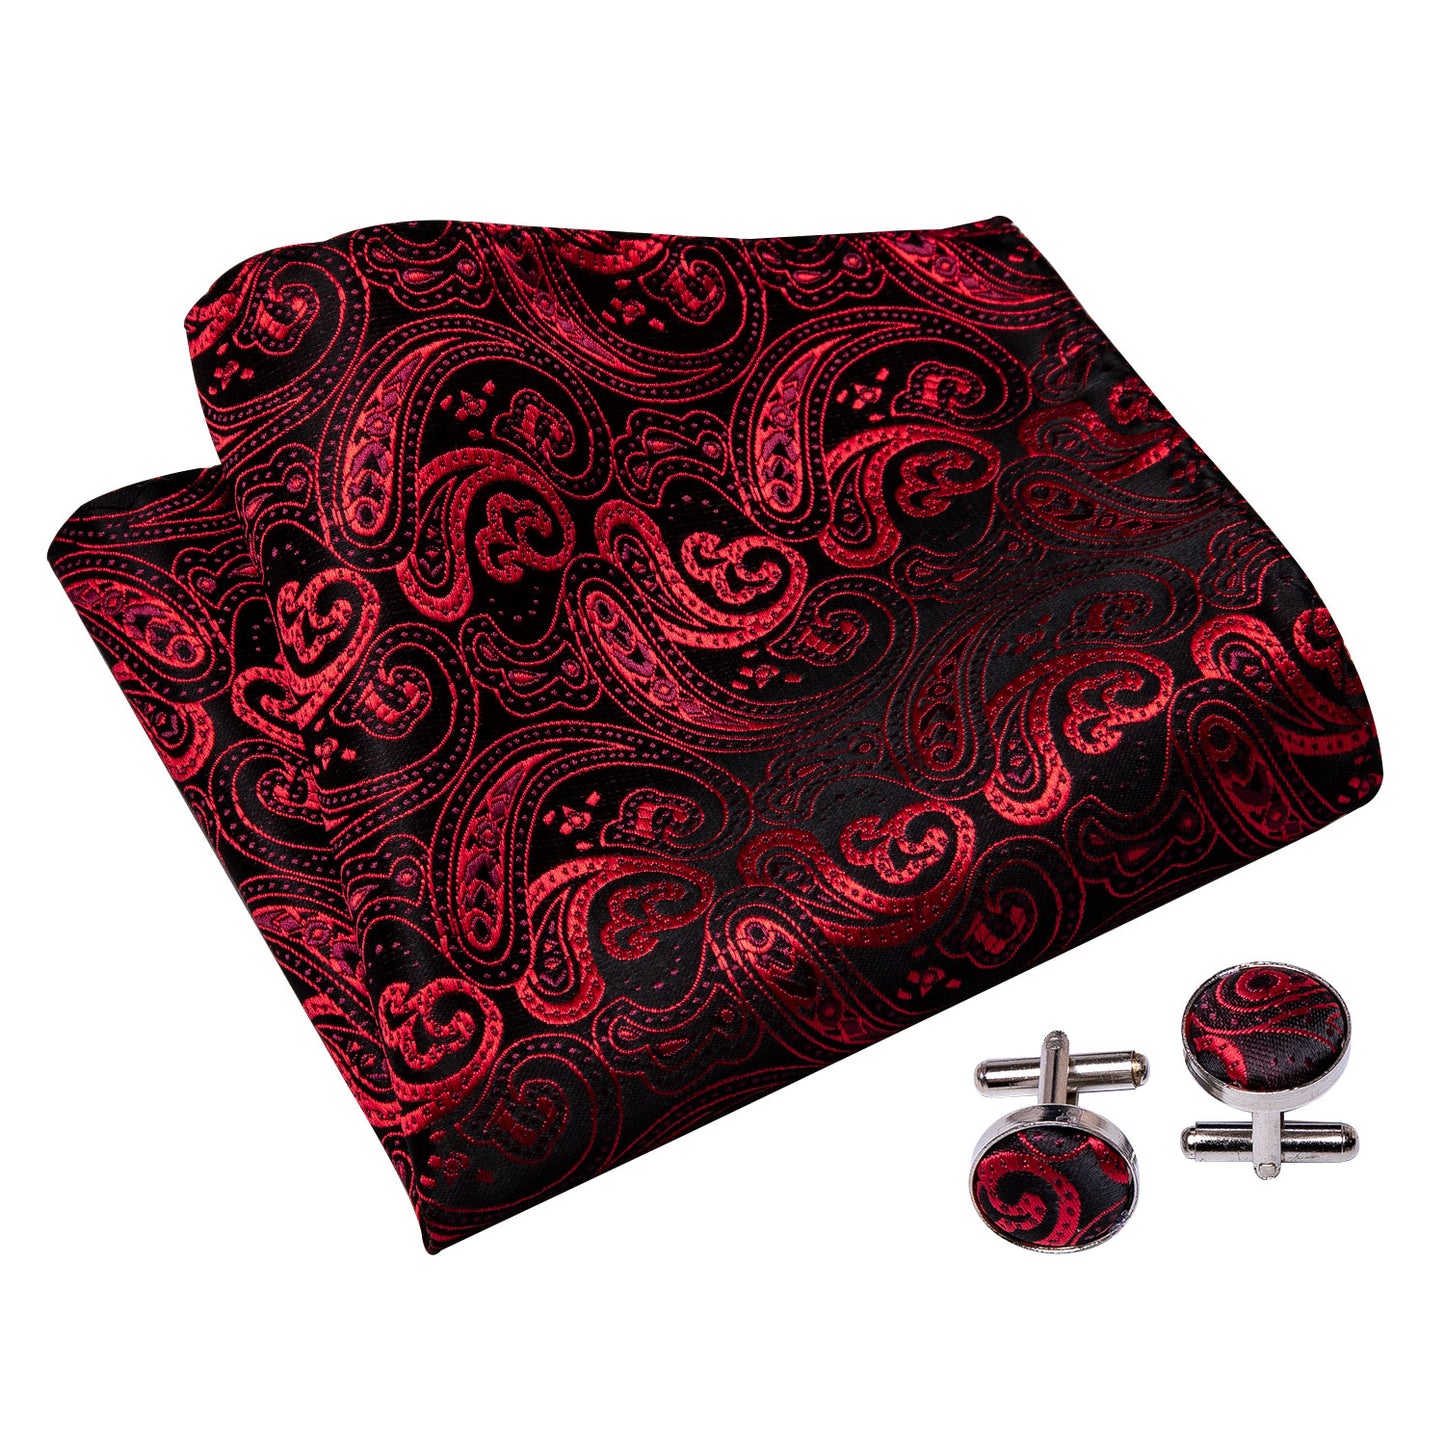 Victorian Ascot Silky Floral Day Cravat Set [Maroon Paisley]